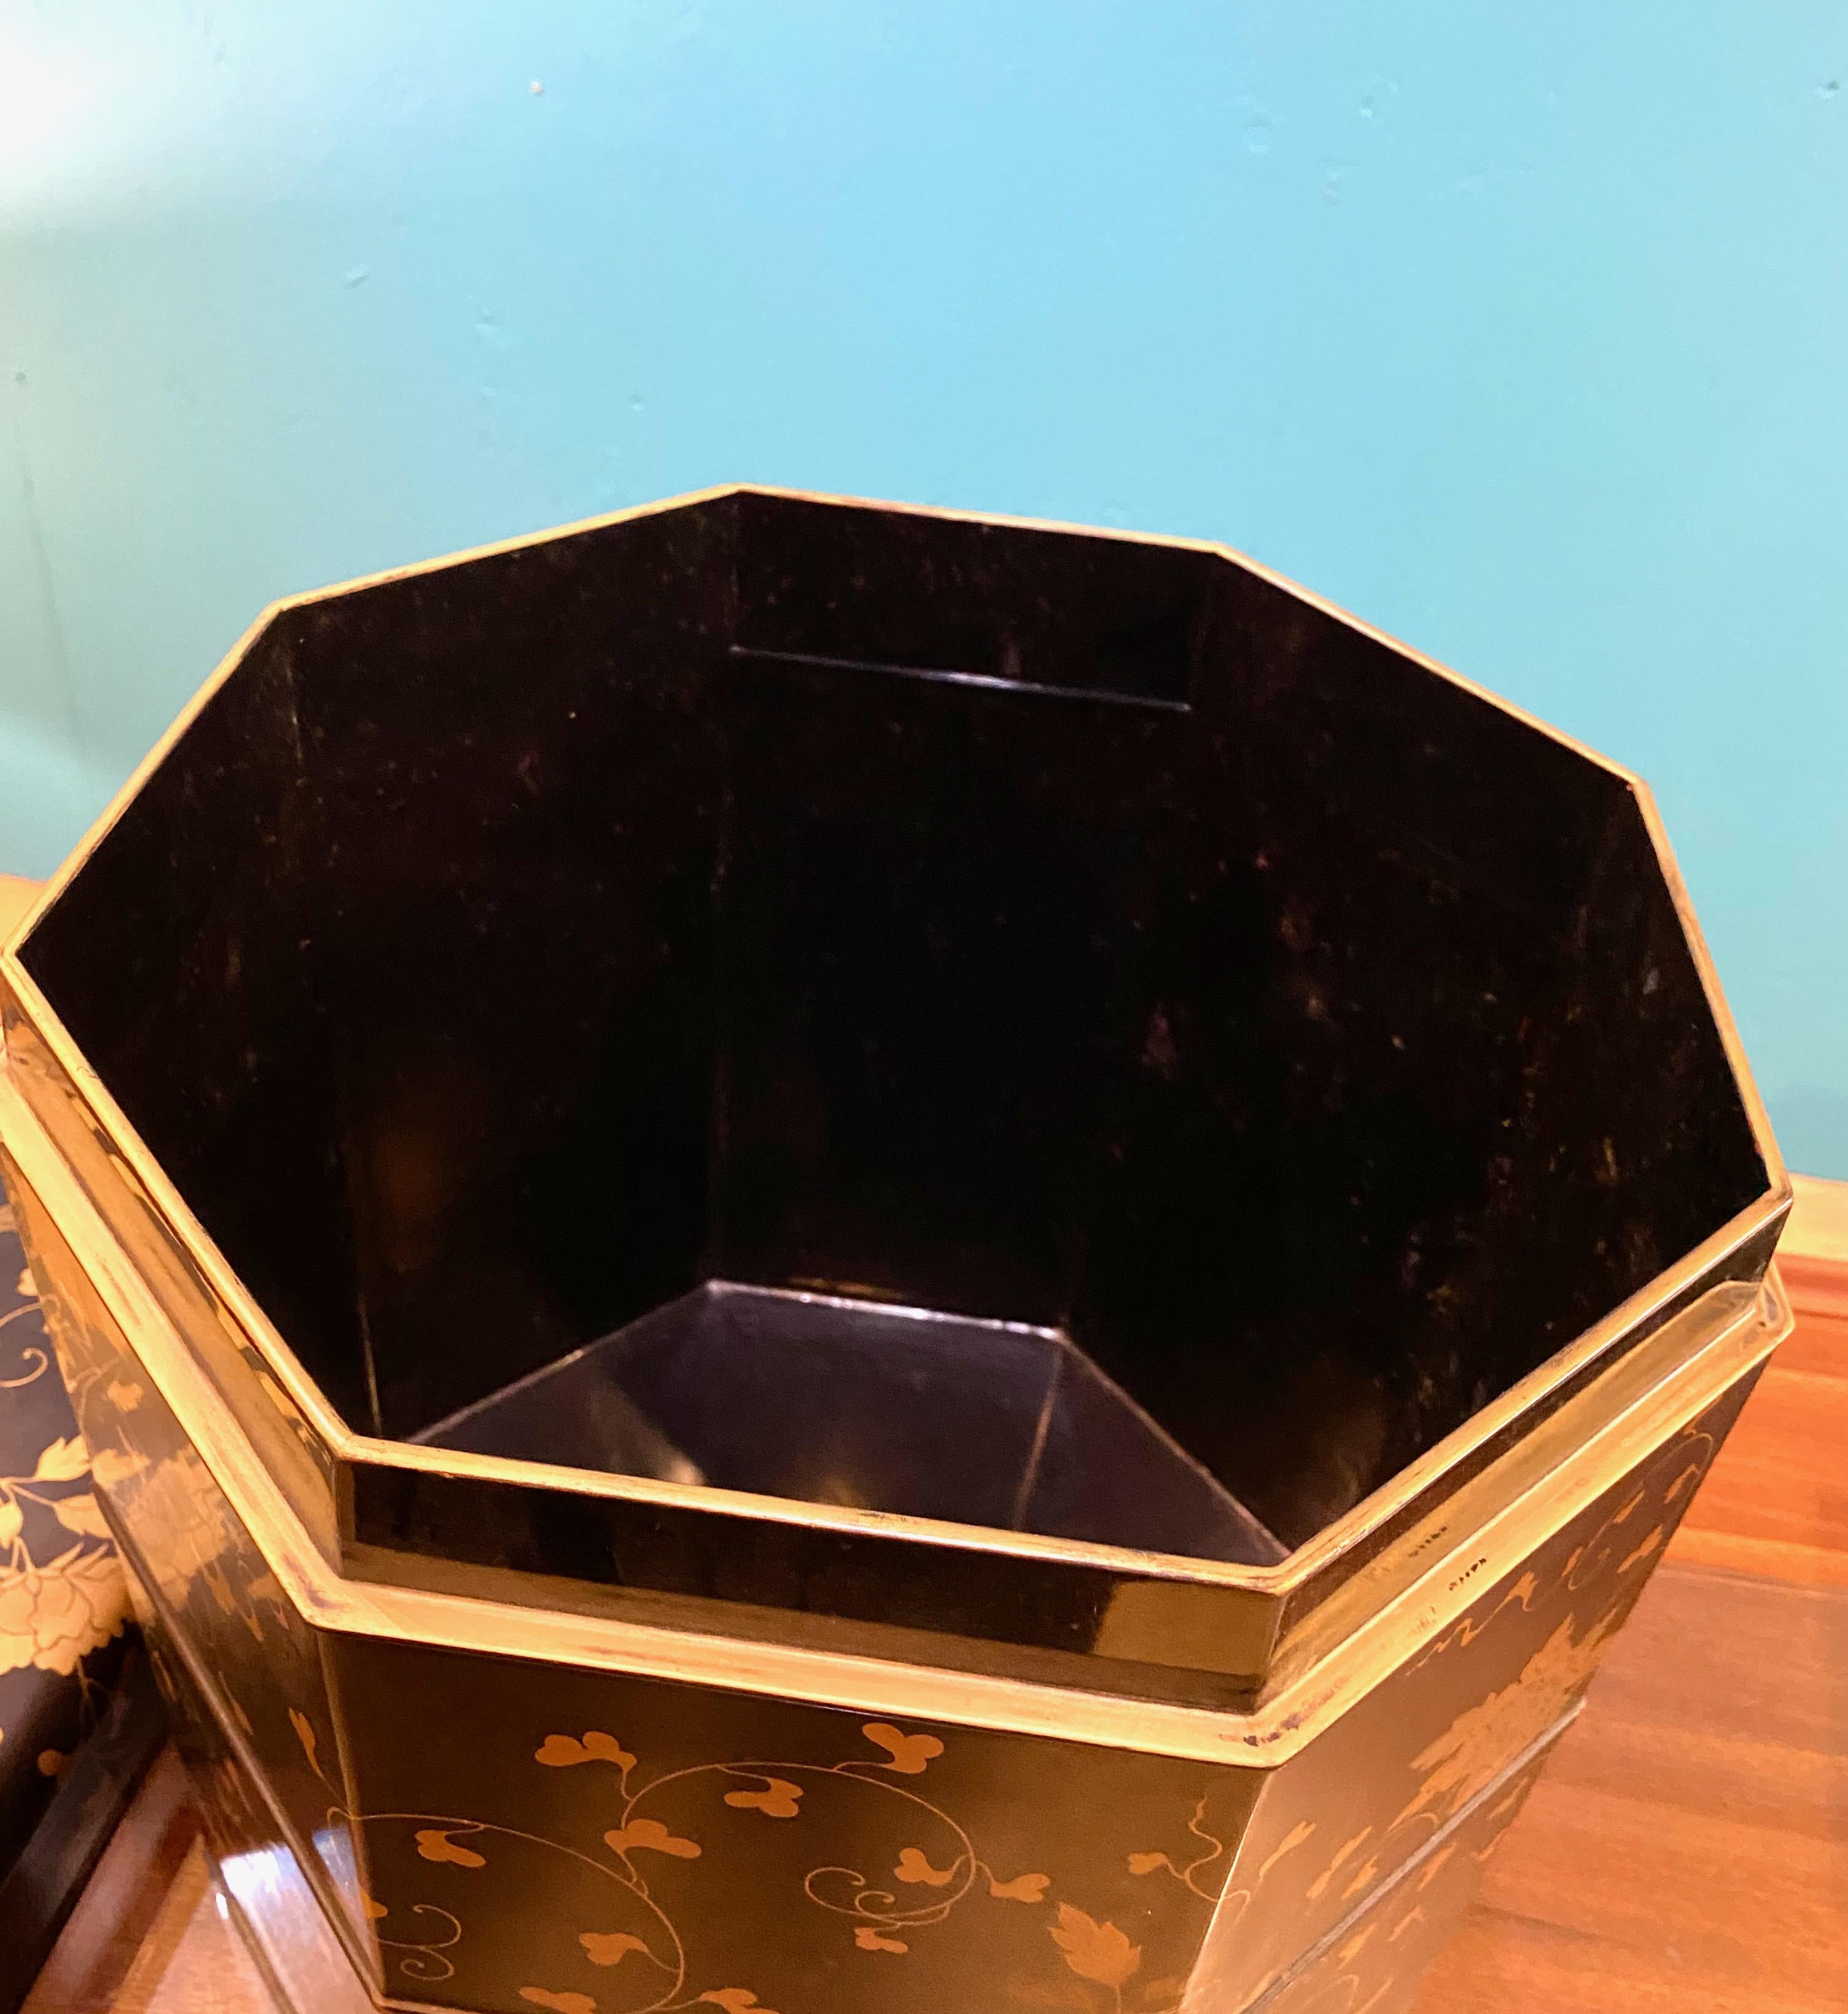 This is a good example of a Japanese Hokai box that was used to store shells for the traditional game of Kia-awase. The box dates to the later part of the 20th century. The lacquer box is adorned with makie. The cover features refined makie